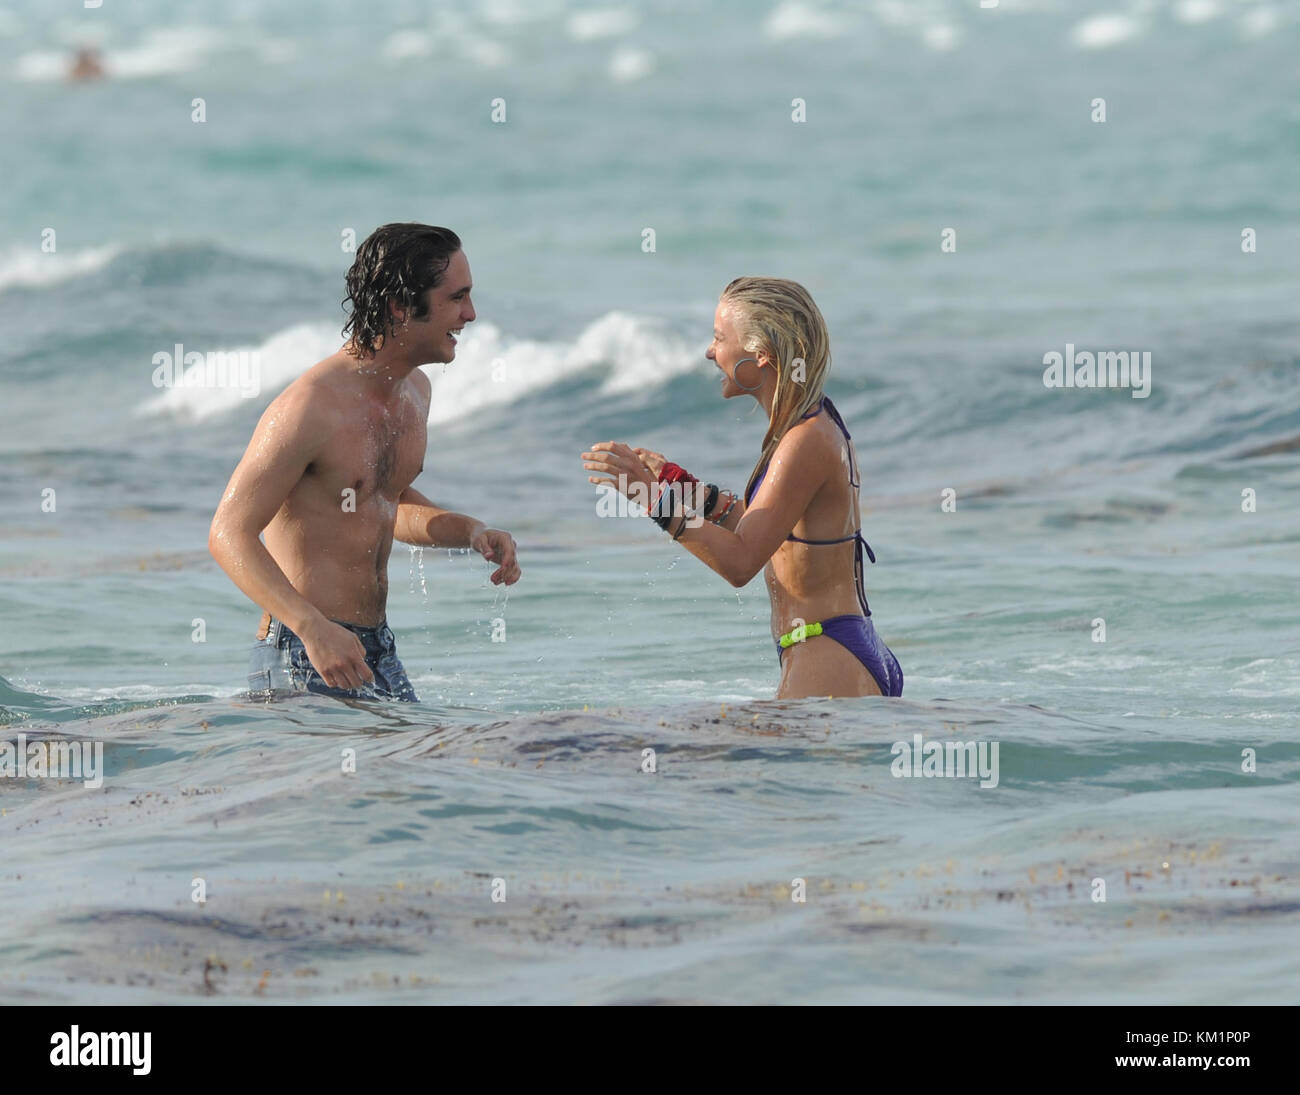 HOLLYWOOD, FL - MAY 23:  Julianne Hough (wearing a smoking hot purple bikini) and Diego Boneta enjoyed a "make out" kissing session in the ocean day one on the set of "Rock of Ages" starring Tom Cruise. Julianne looked like she was having so much fun with her co-star Diego.  After she was done devouring Diego the insatiable star got out of the water and checked out some more "hunky ' dudes on the beach but not before removing the seaweed from her beautiful blond locks.  WOW that’s a rap for day 1.  What will Ryan Seacrest say when he sees these pixs he better get to Miami Quick.    On May 23,  Stock Photo